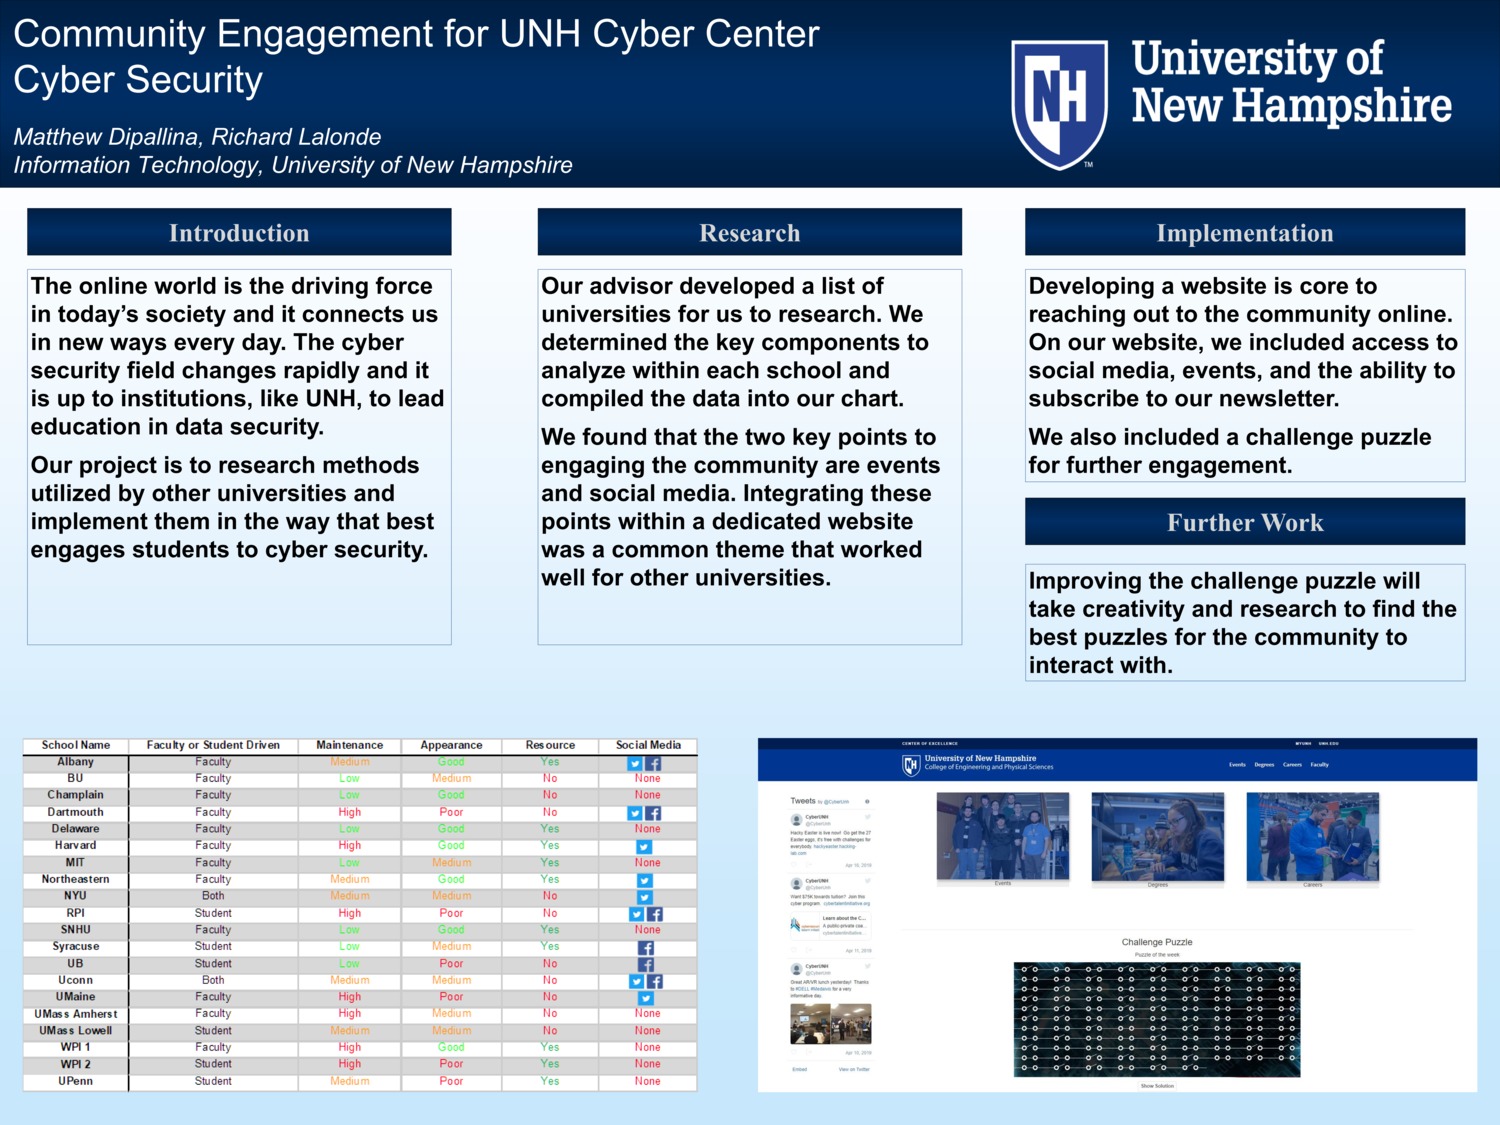 Community Engagement For Unh Cyber Center by mrd1016